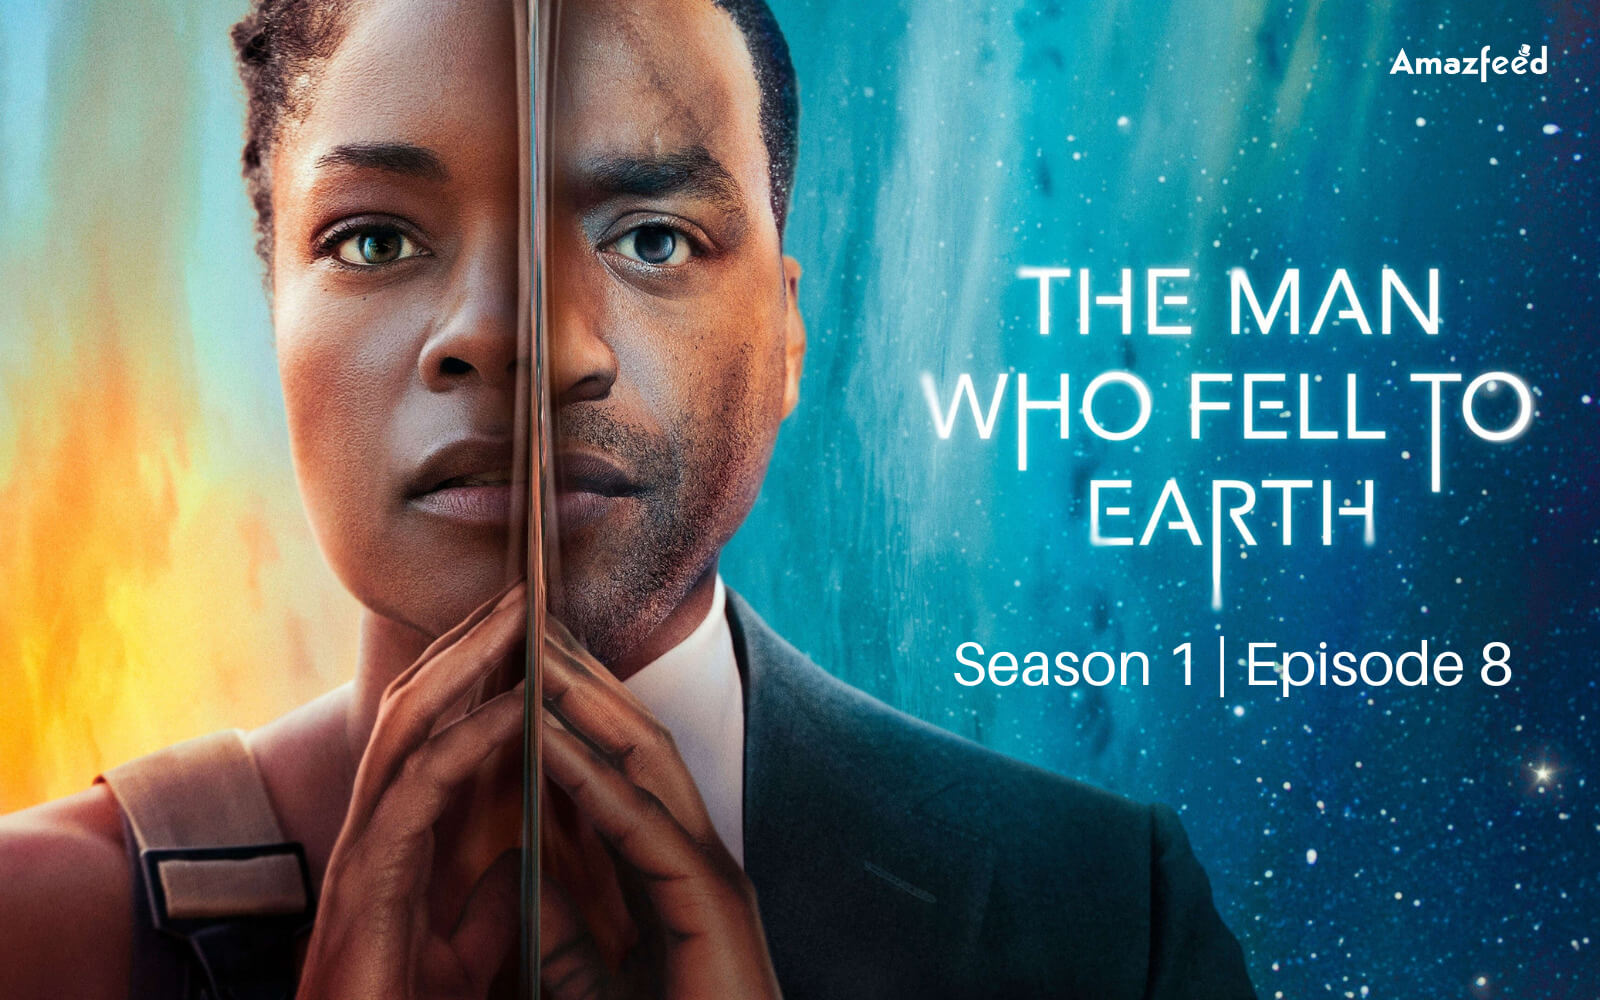 The Man Who Fell to Earth Season 1 Episode 8 Release date